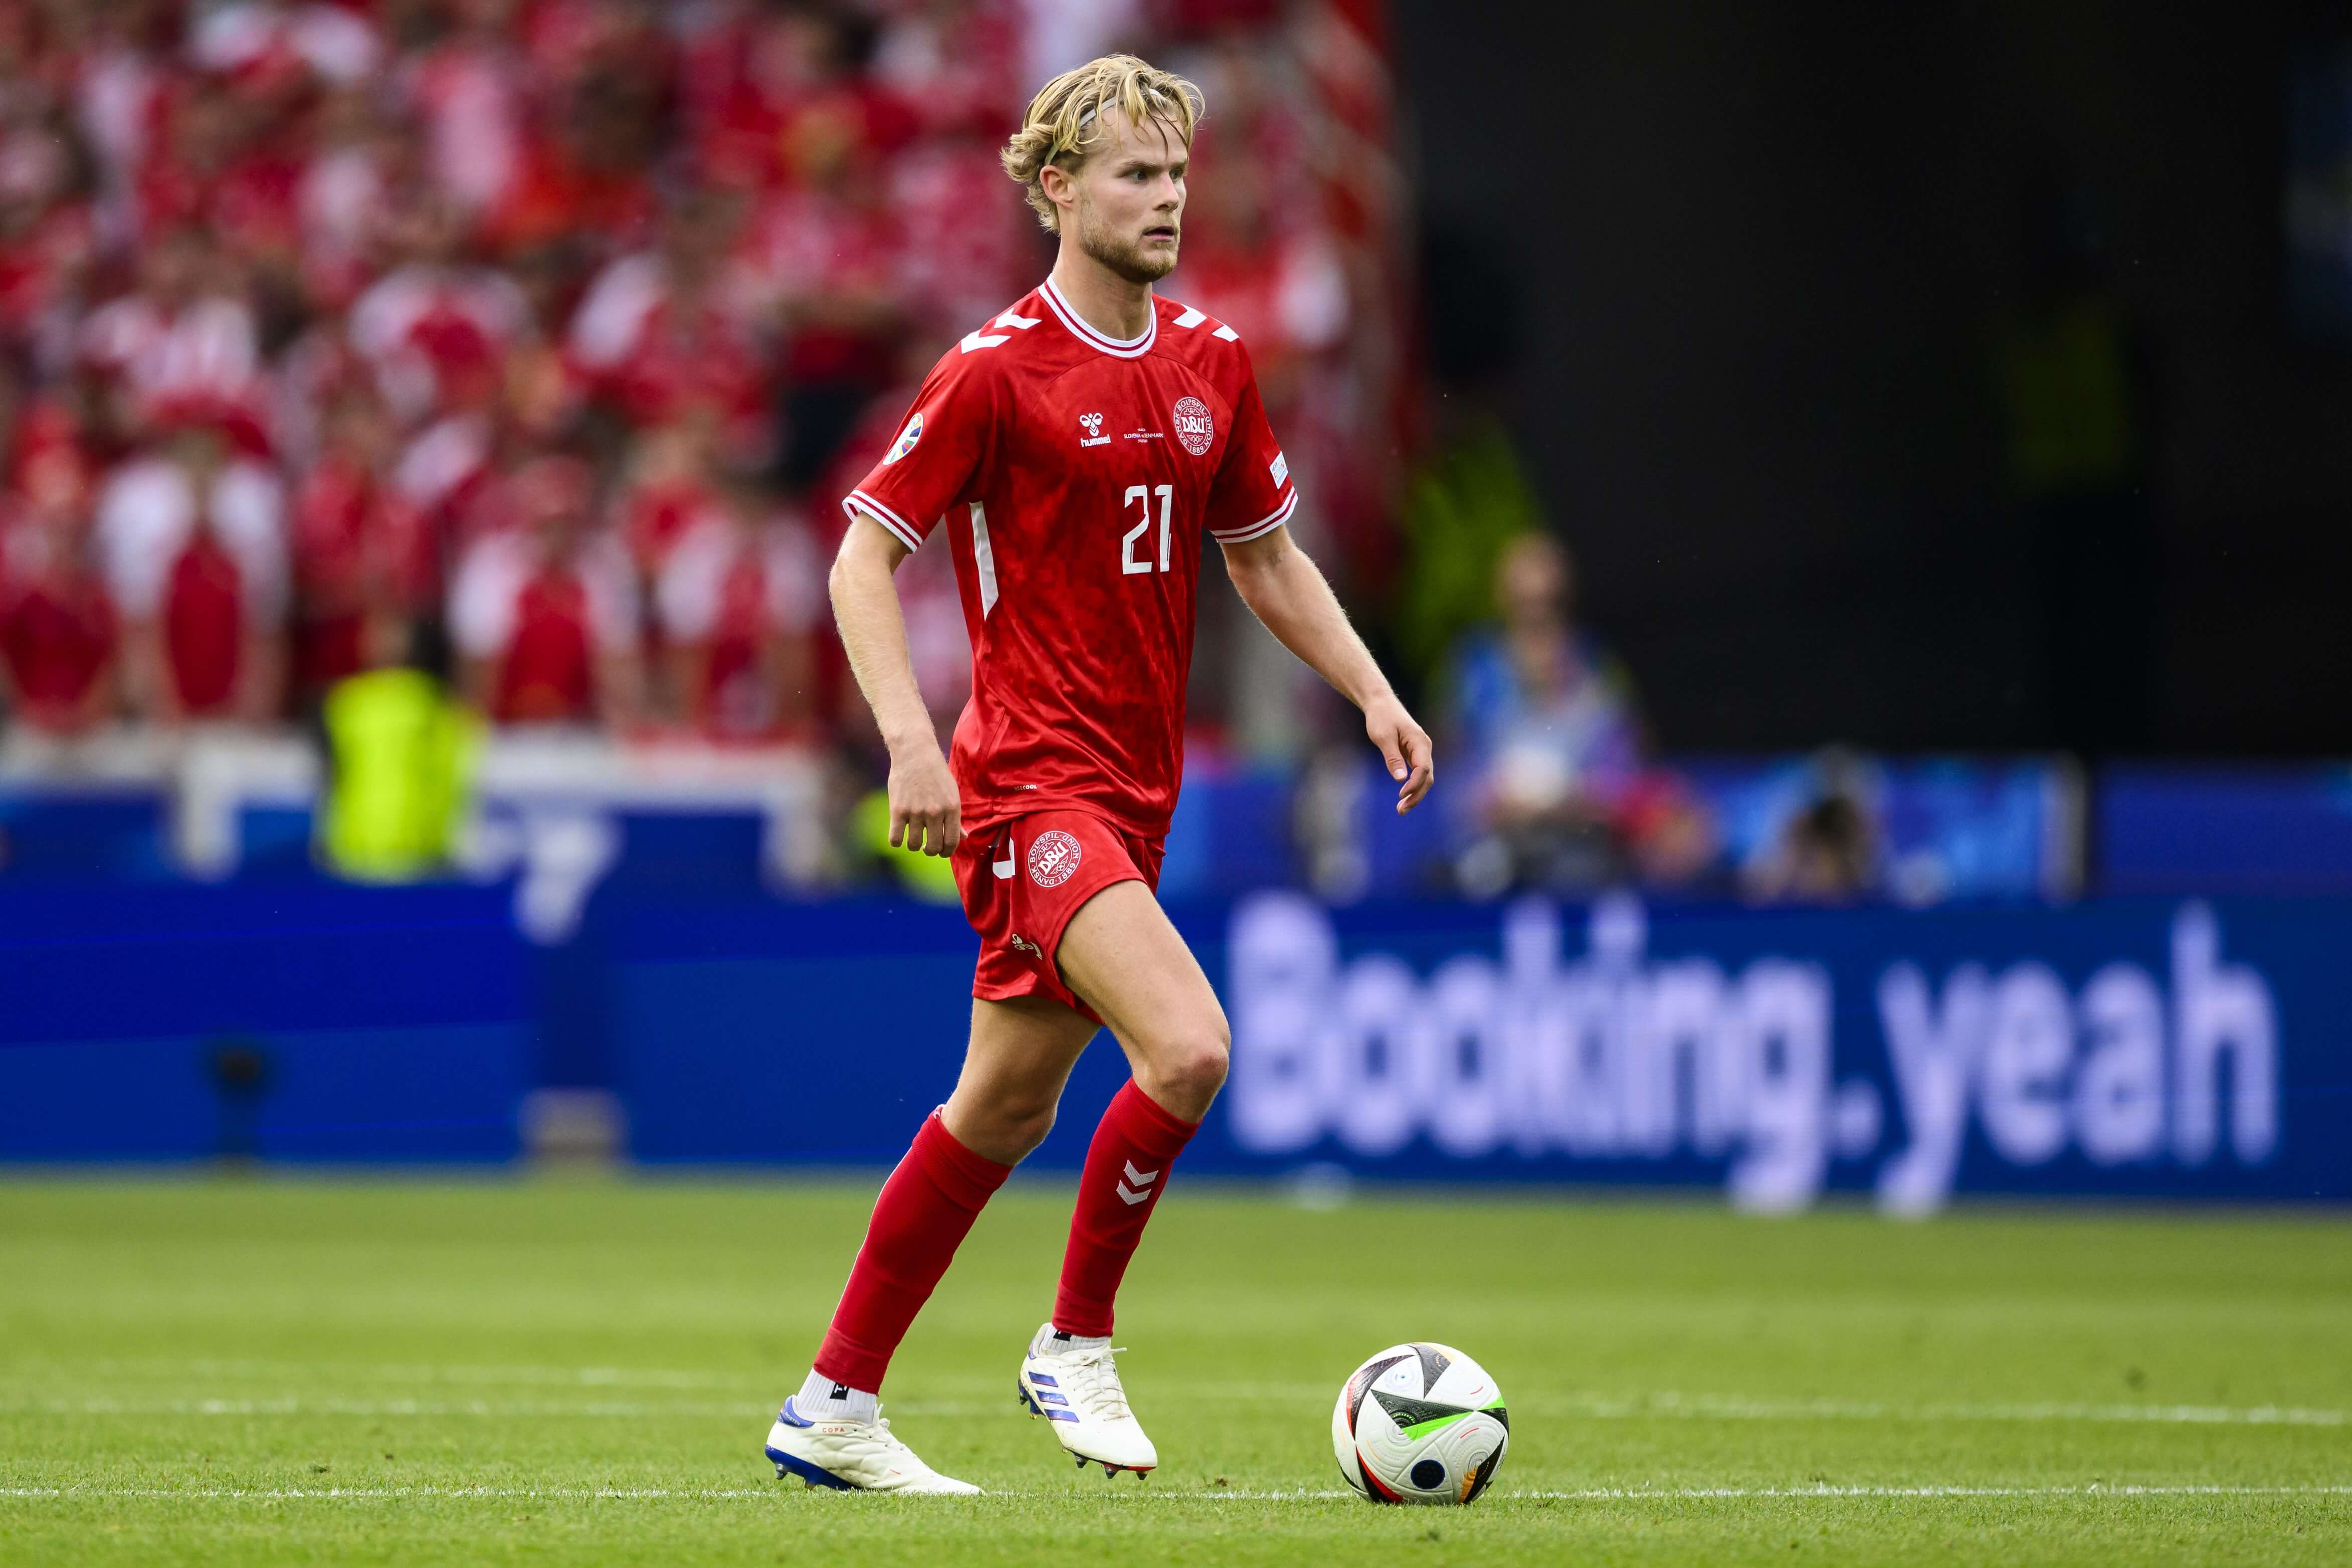 How To Bet - Denmark vs England Odds, Picks & Predictions: When It Rains It Pours